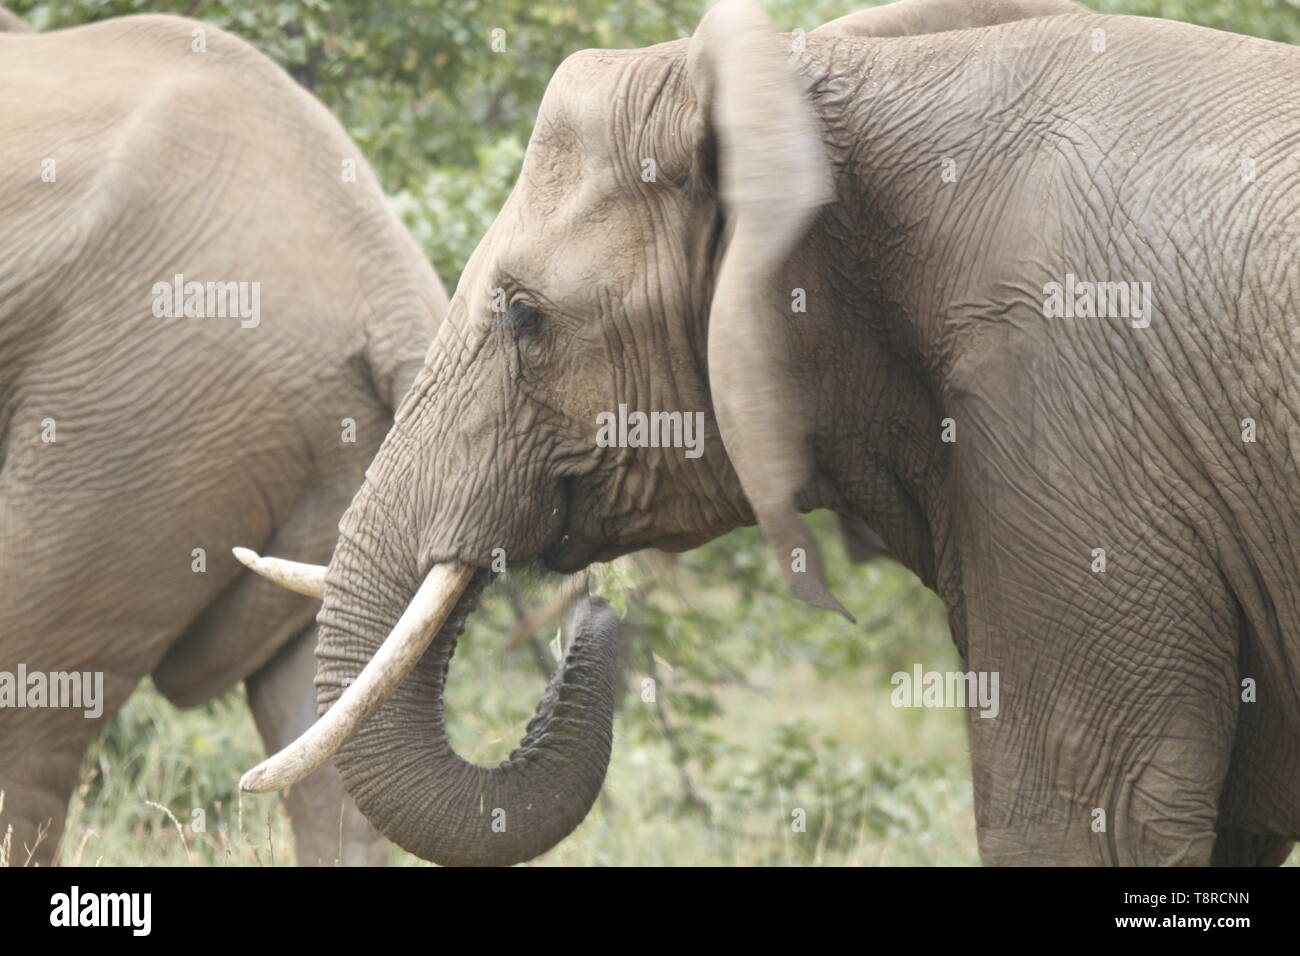 Elephant with uneven tusks eating Stock Photo